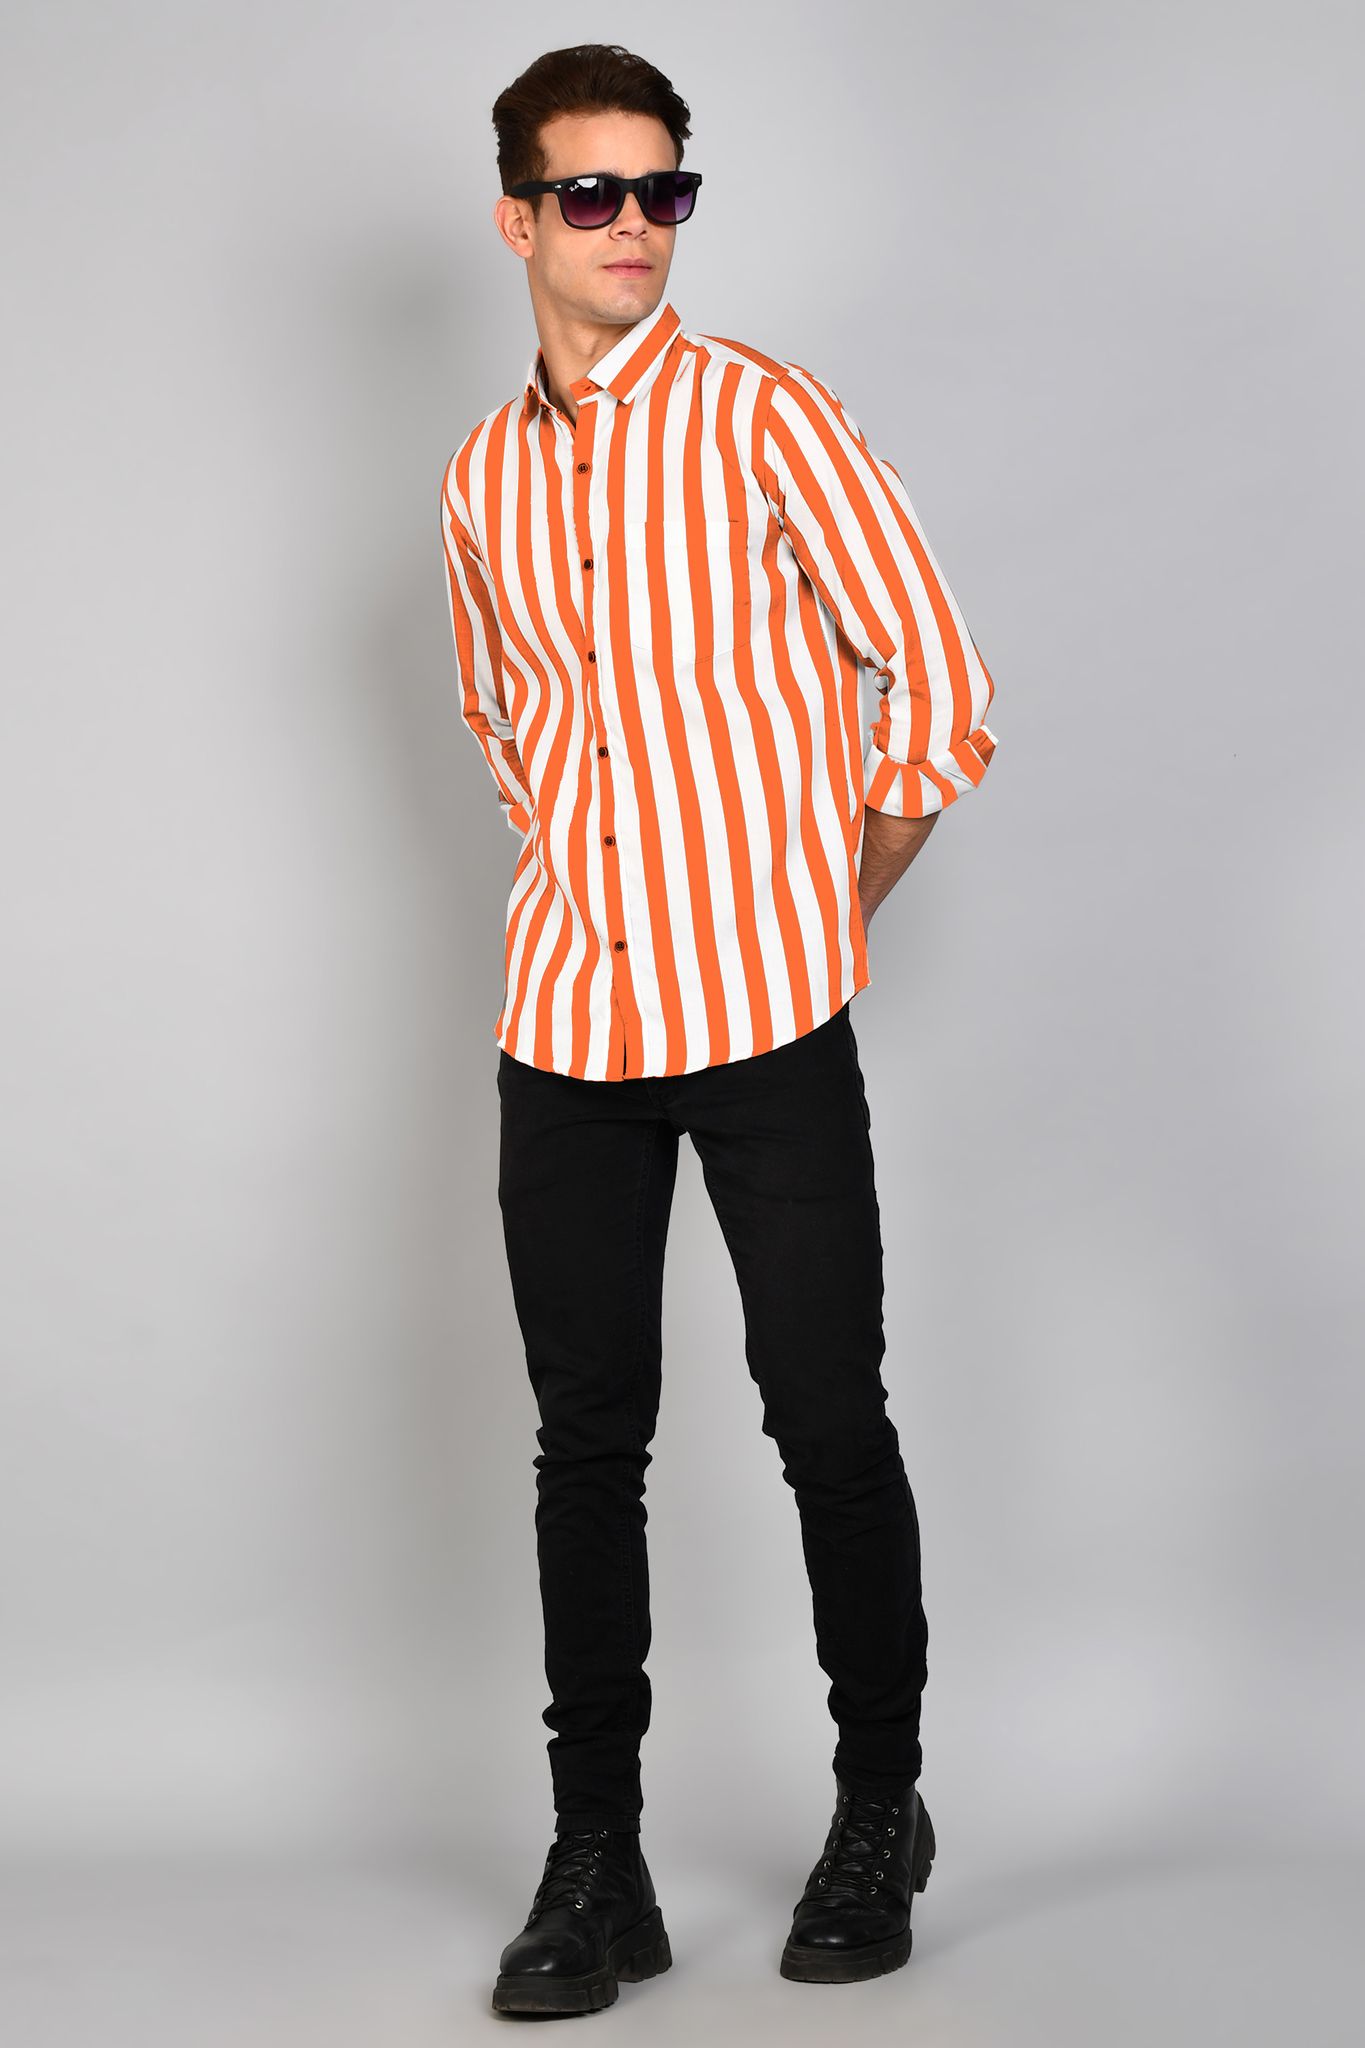 Casual Striped shirt for Men full sleeves